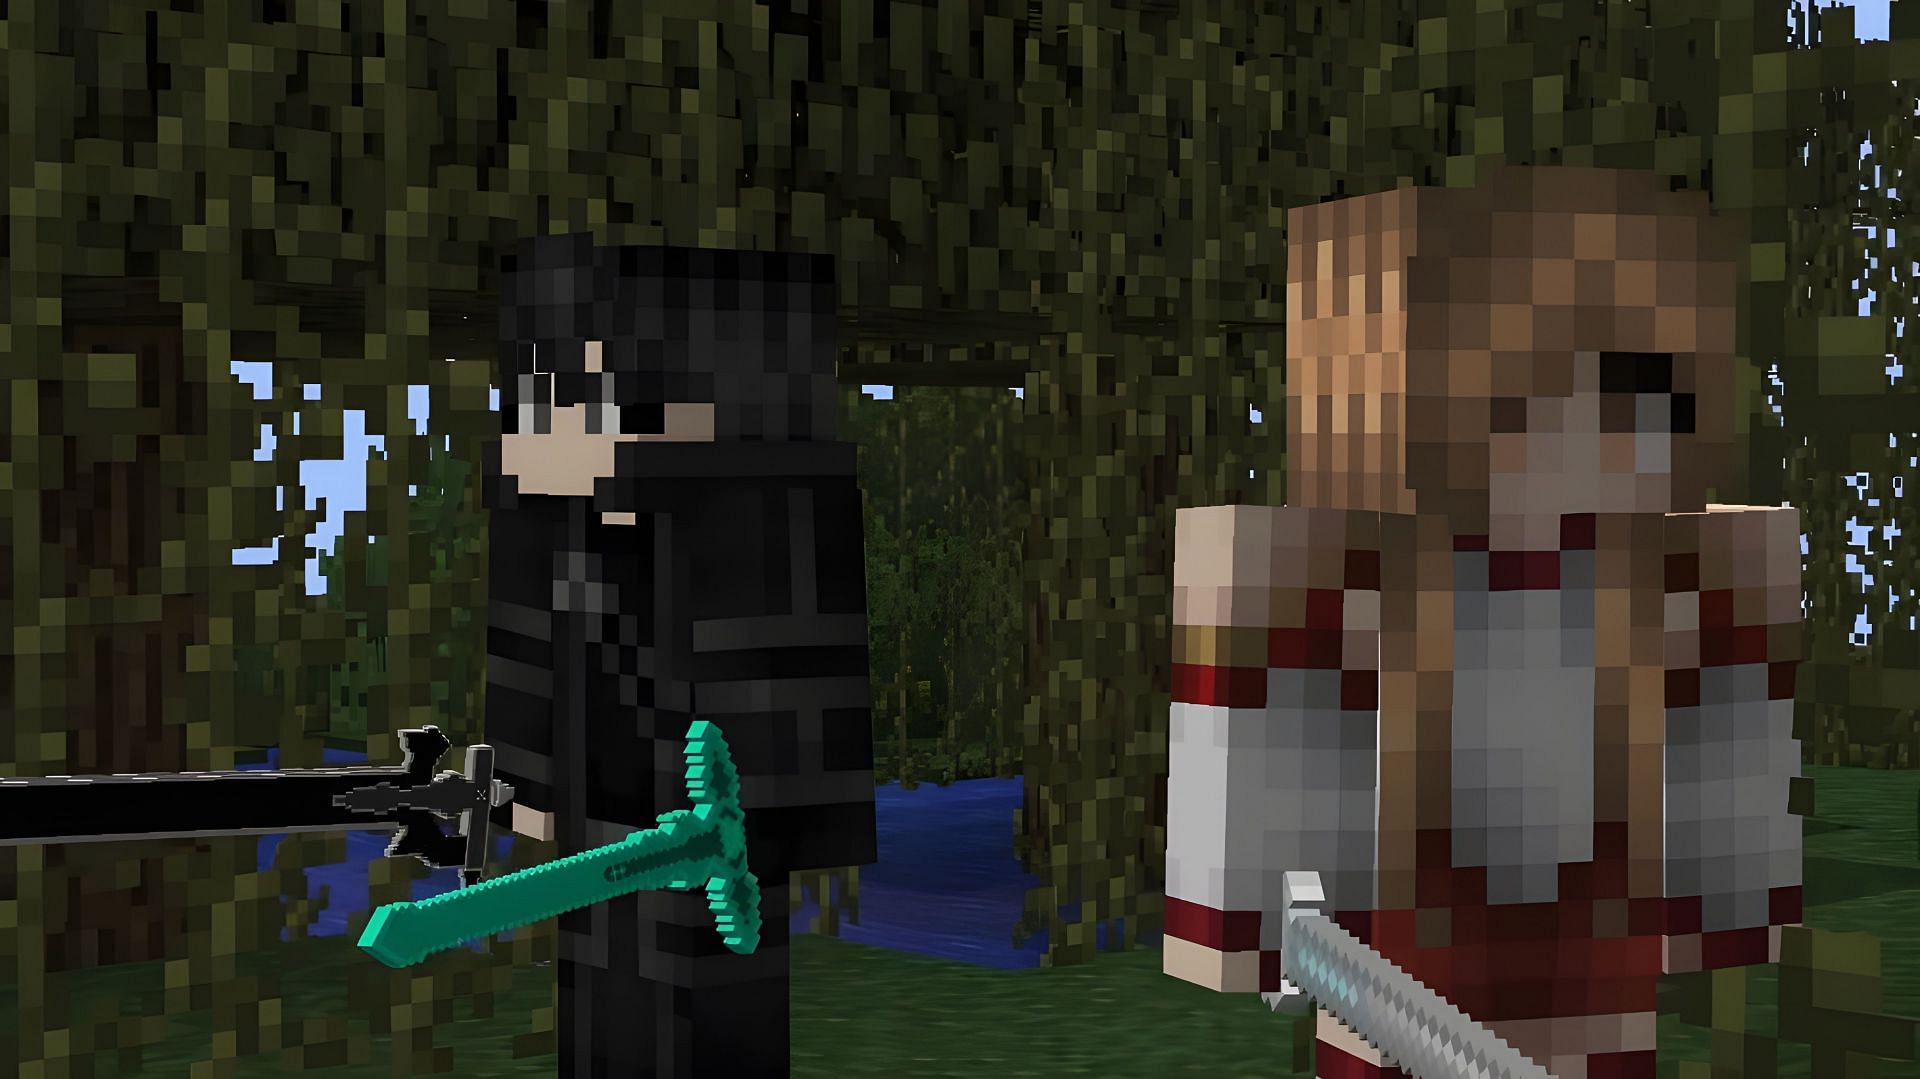 Sword Art Online is a popular anime that has been recreated in Minecraft (Image via Mojang)